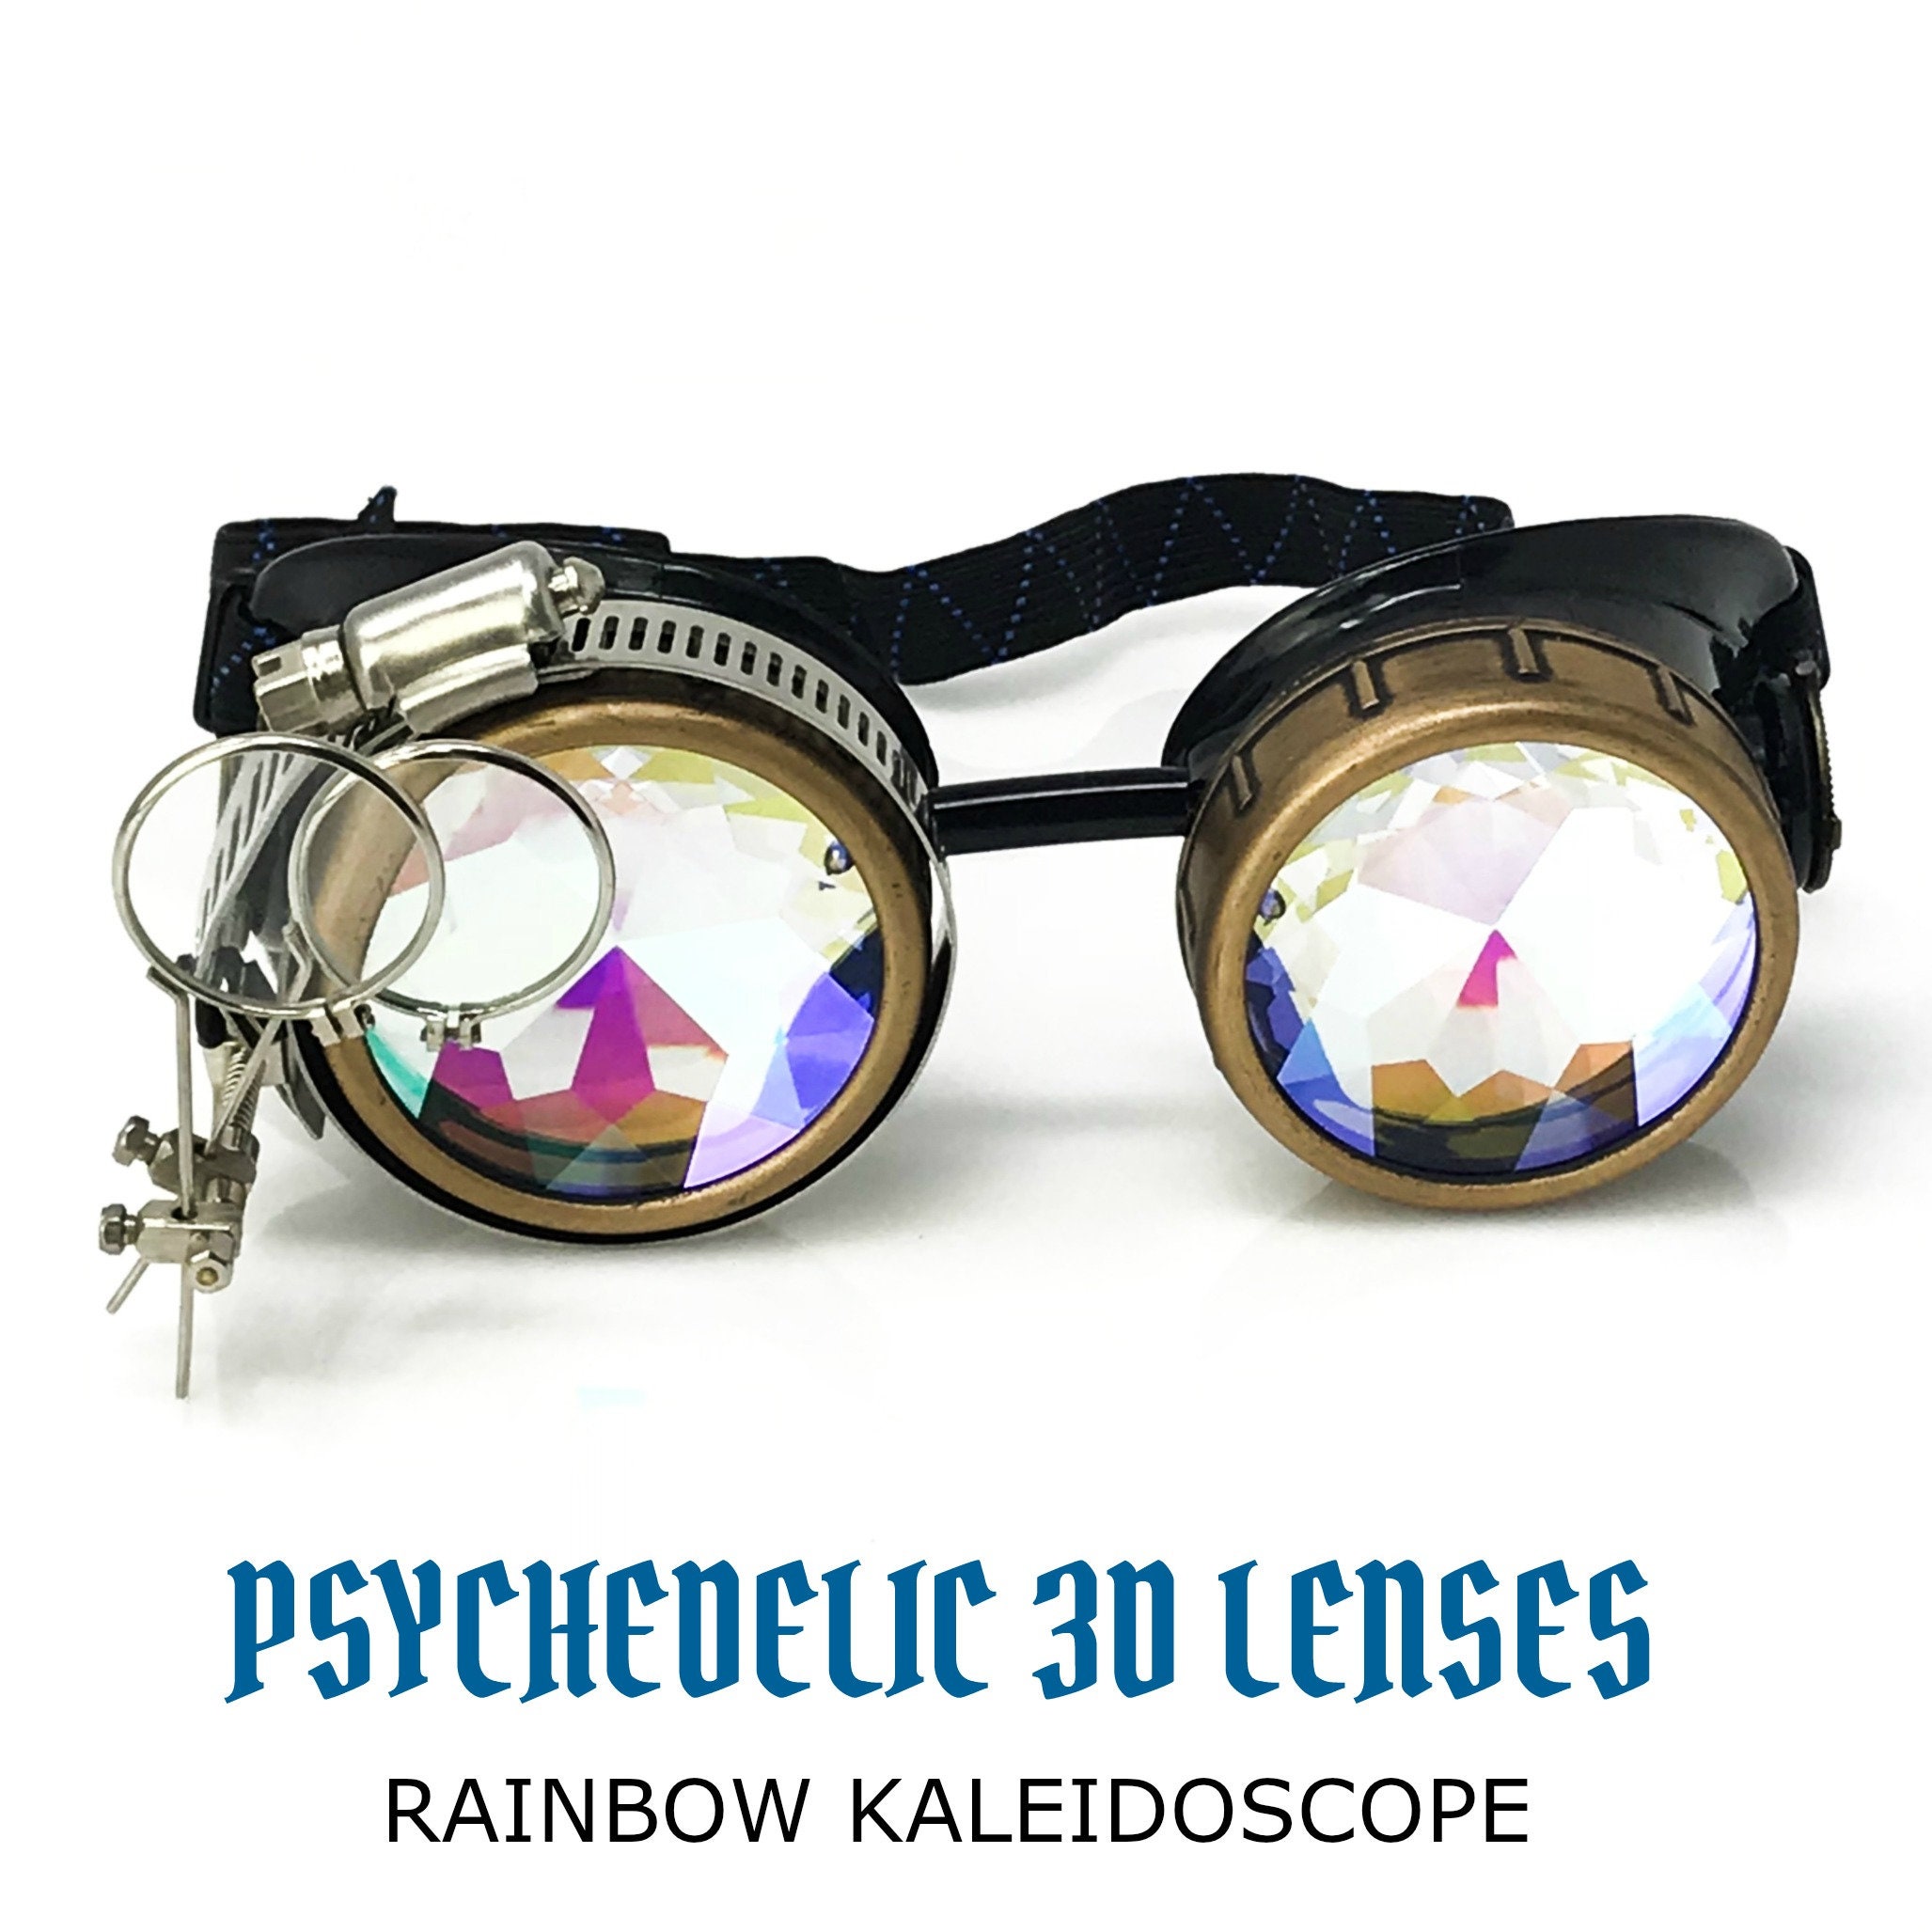  Steampunk Victorian Style Goggles with Compass Design & Ocular  Loupe, Rave Glasses : Clothing, Shoes & Jewelry